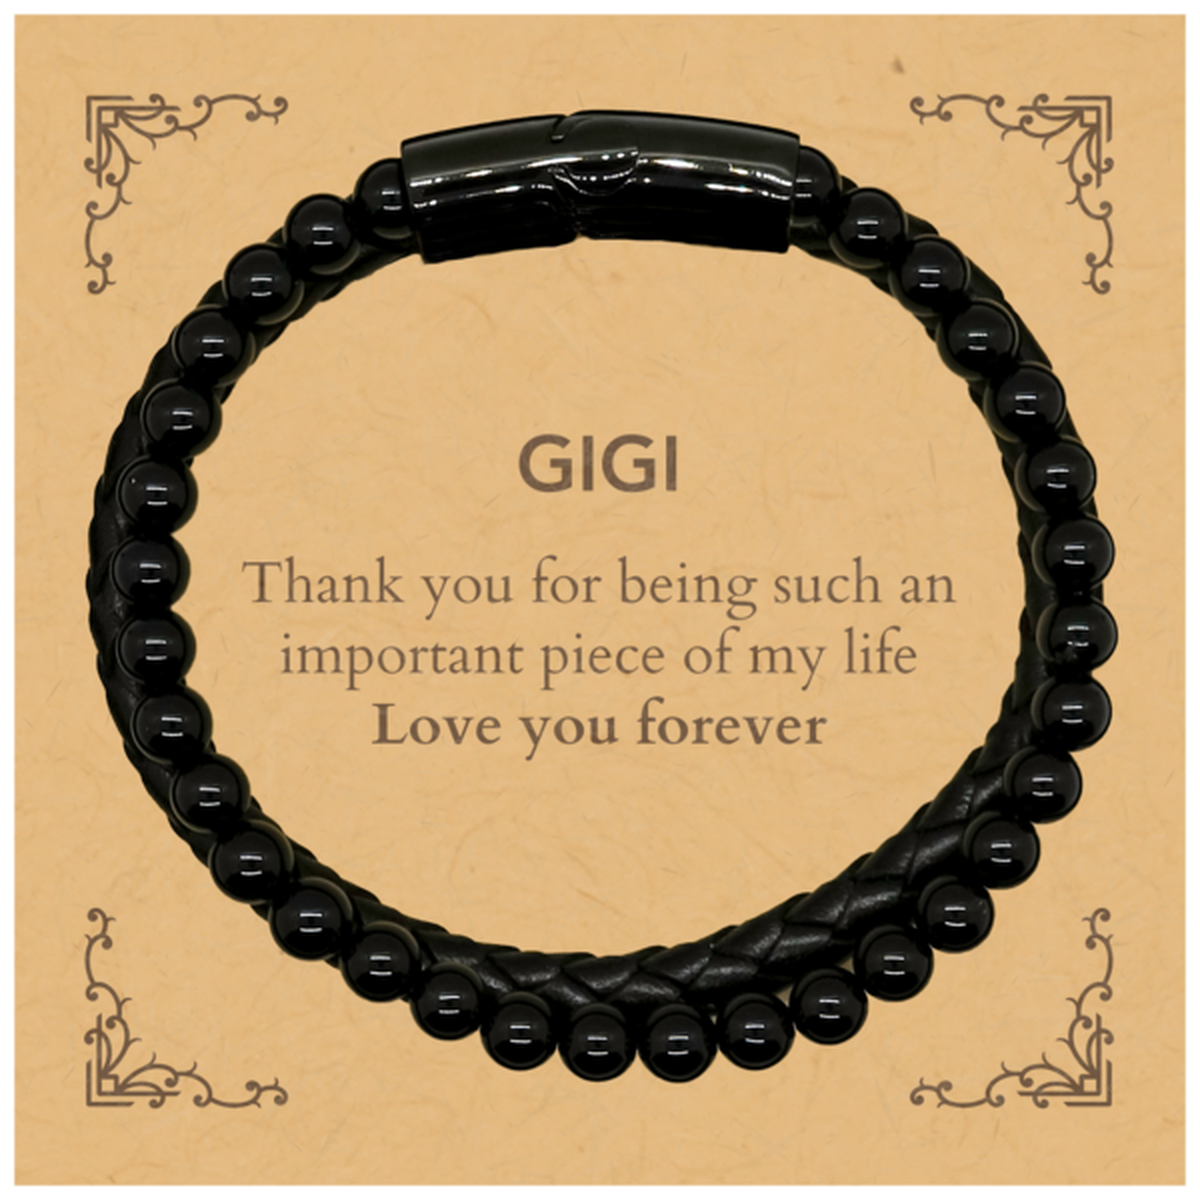 Appropriate Gigi Stone Leather Bracelets Epic Birthday Gifts for Gigi Thank you for being such an important piece of my life Gigi Christmas Mothers Fathers Day